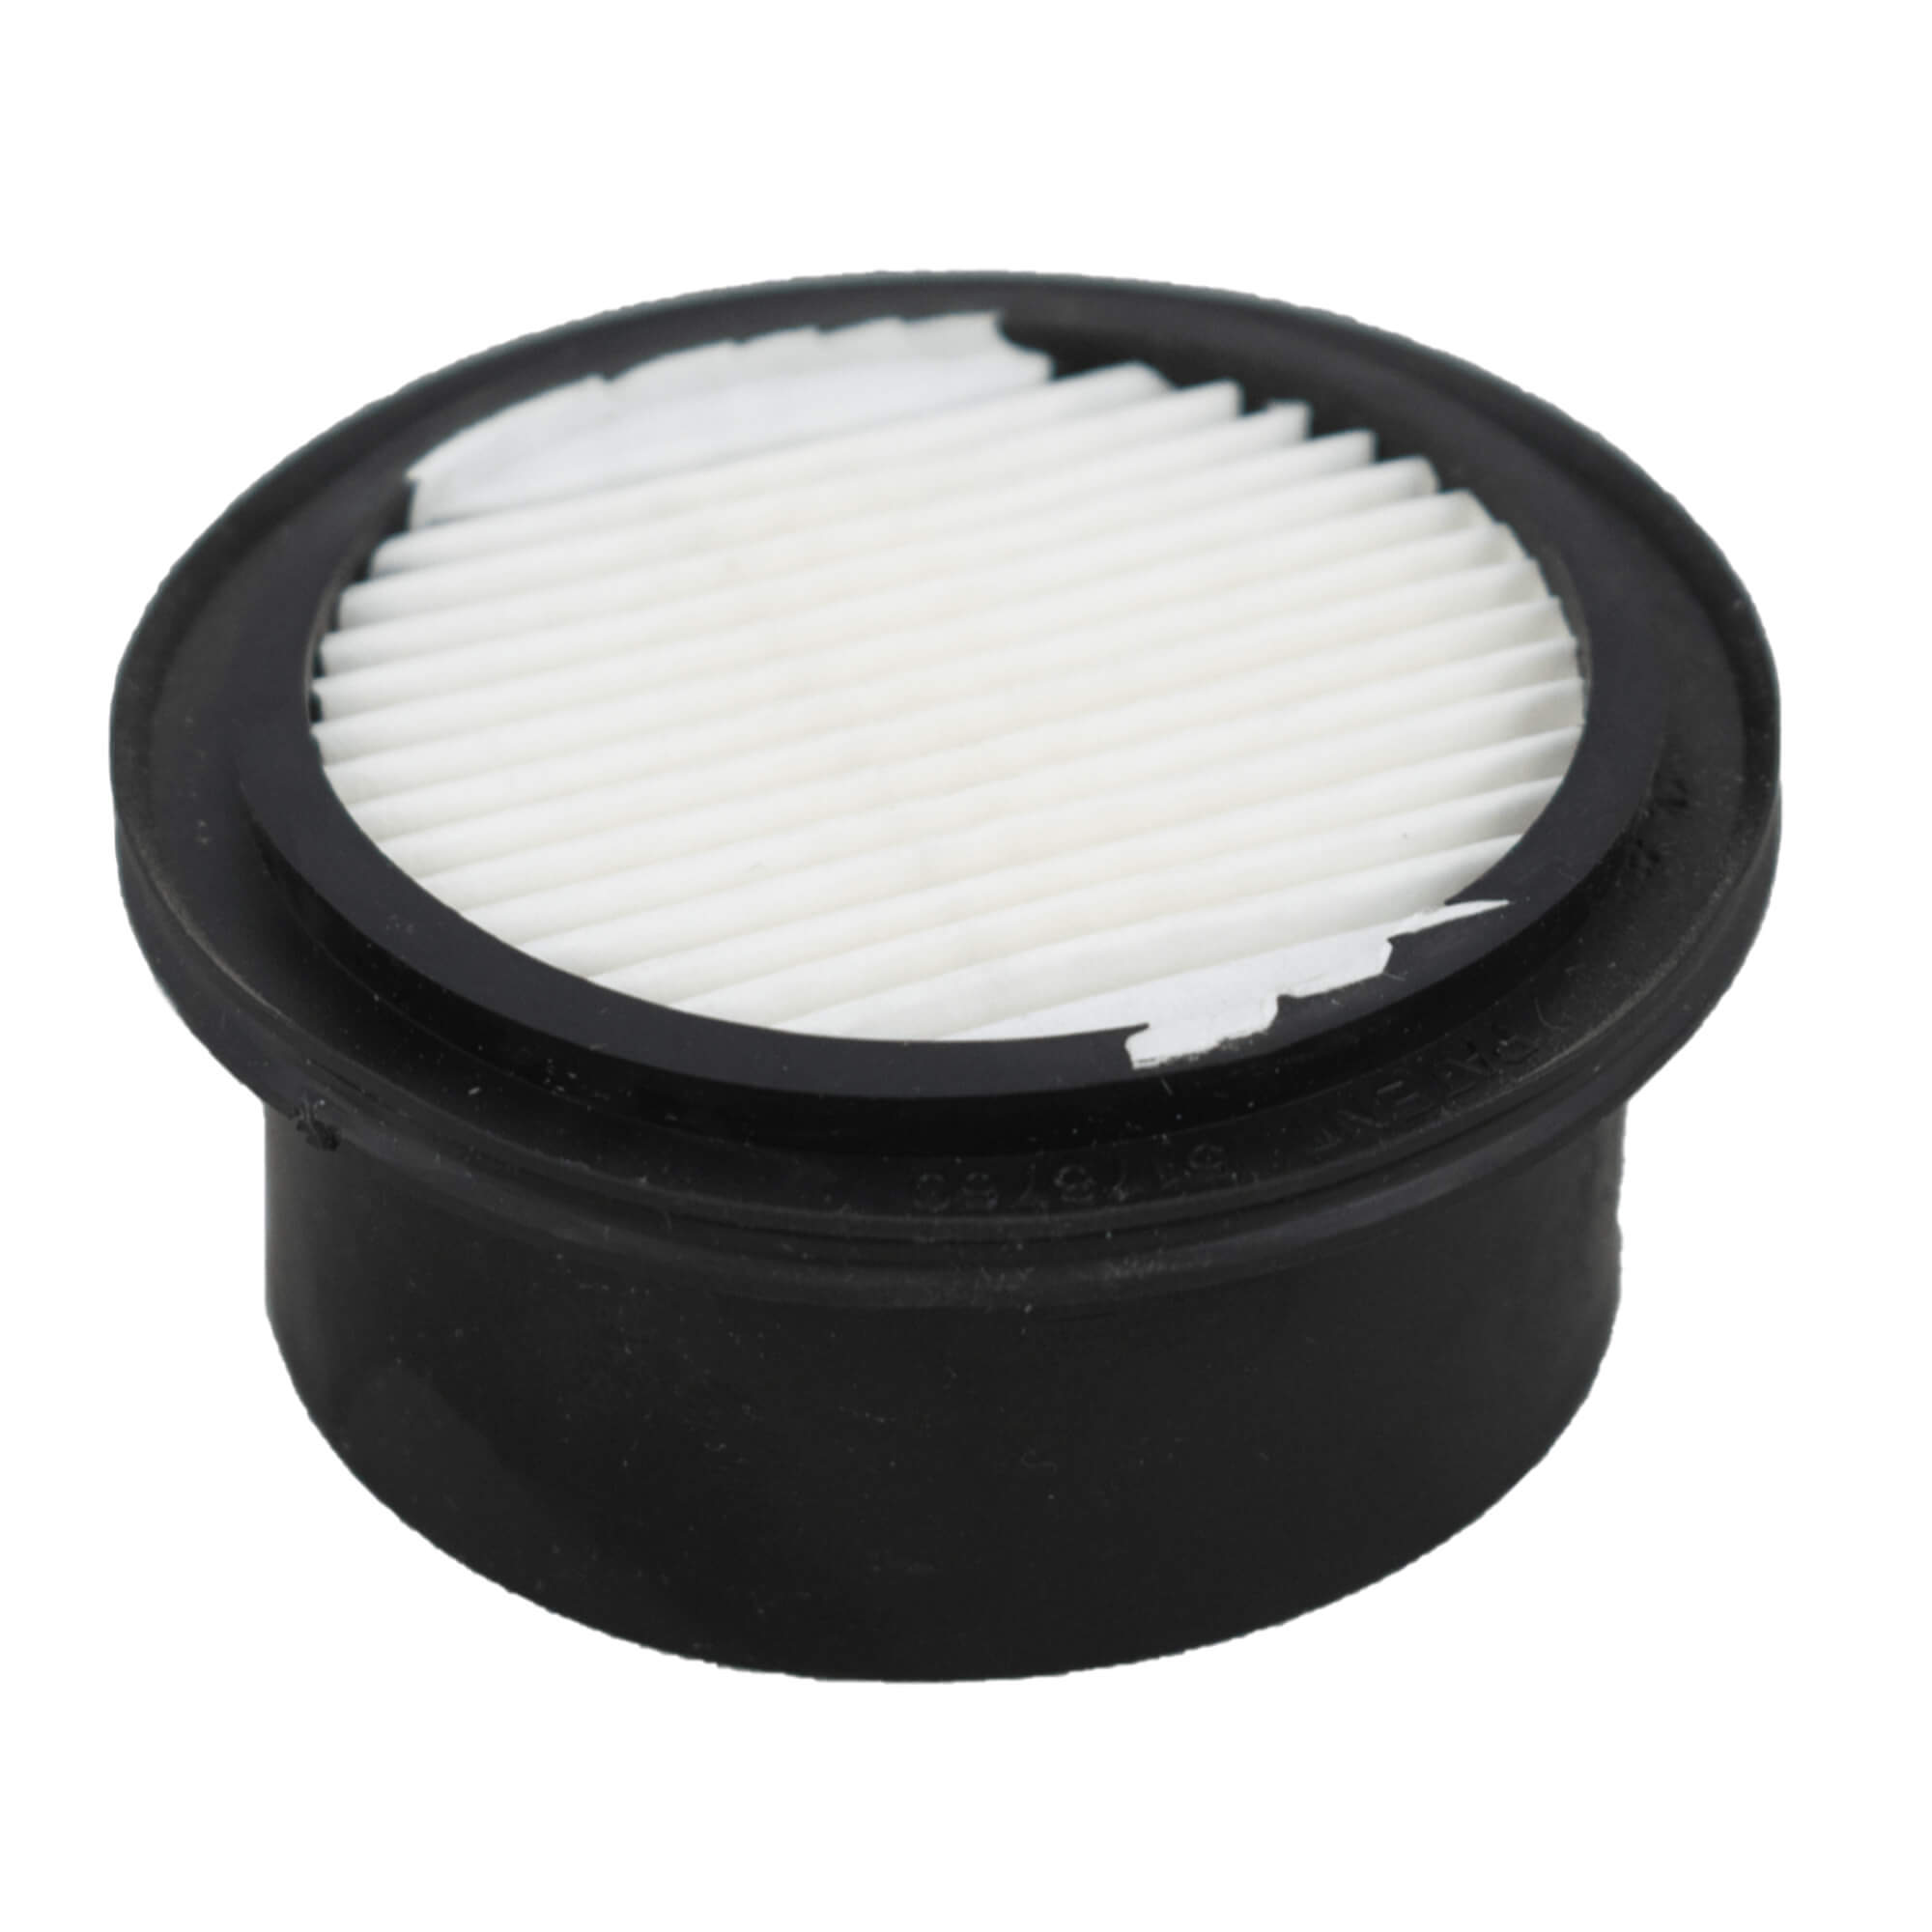 Air Filter Element for 3/4 & 1 HP Aeration Compressors